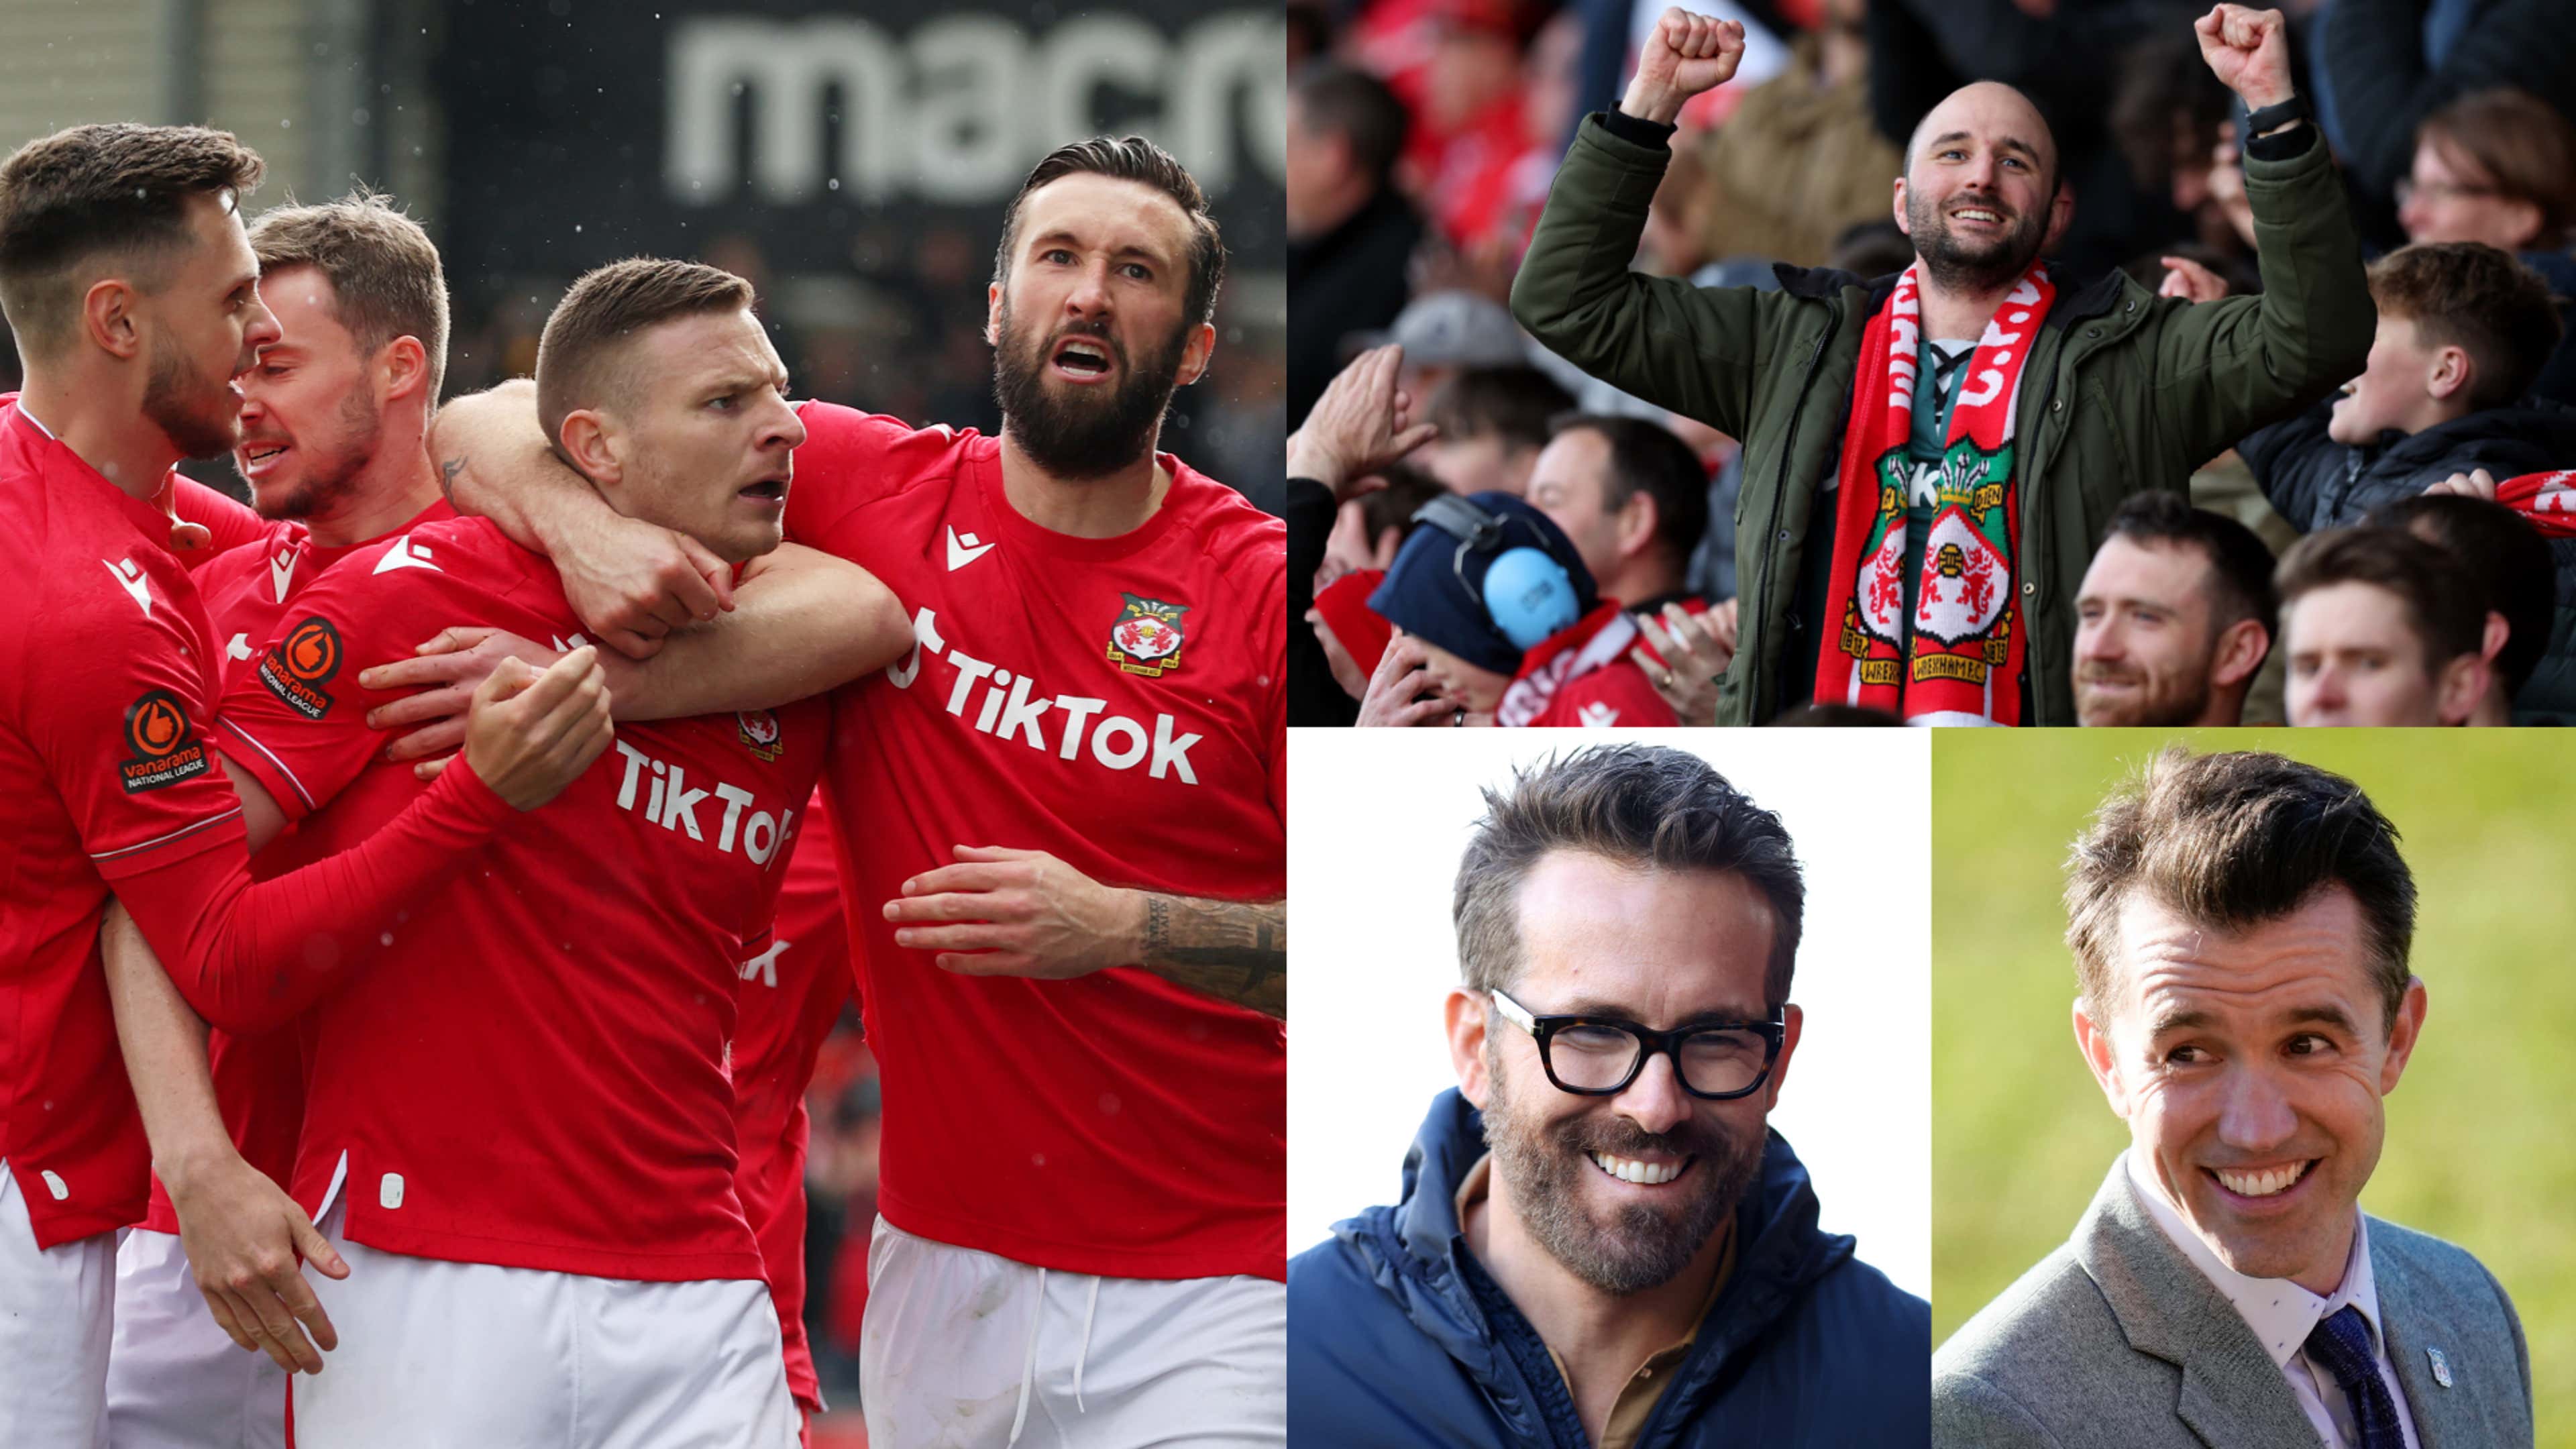 How would Wrexham and Paul Mullin fare in MLS? The factors to